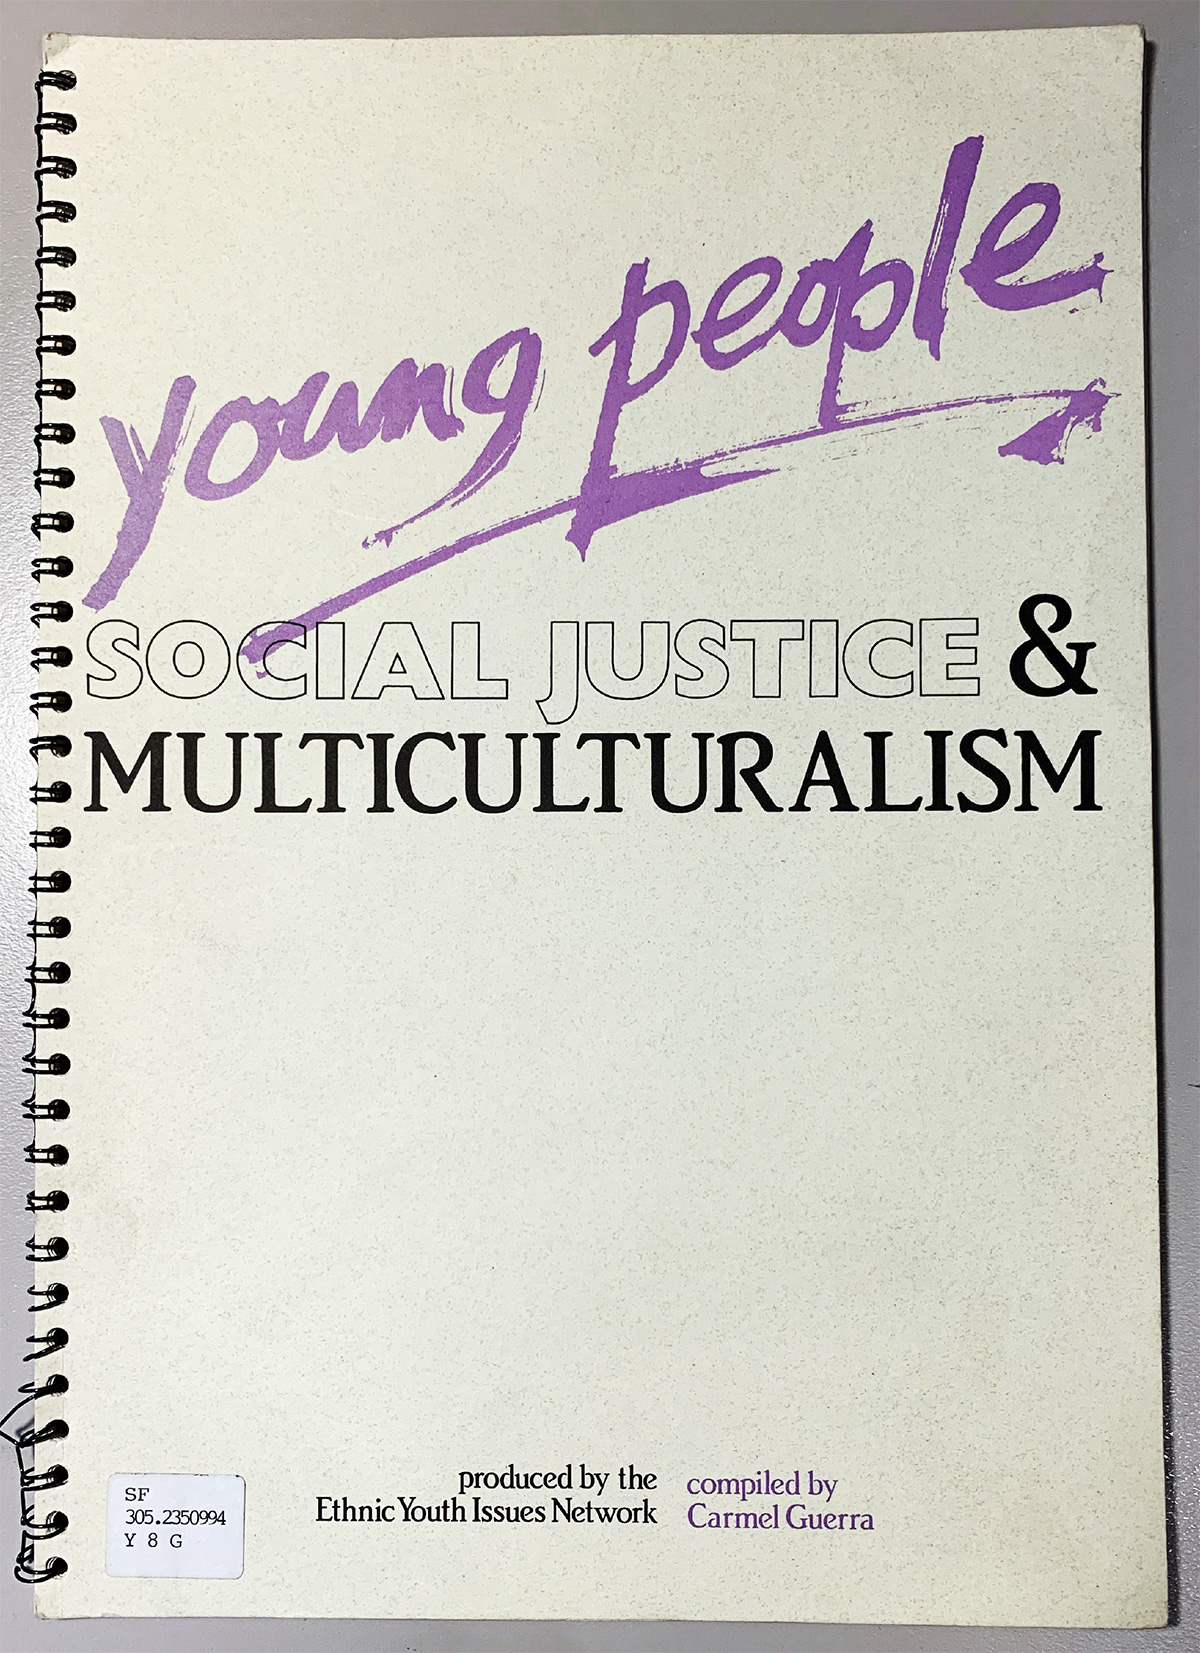 Cover of ‘Young People, Social Justice and Multiculturalism,’ (1990) by Carmel Guerra and the Ethnic Youth Issues Network